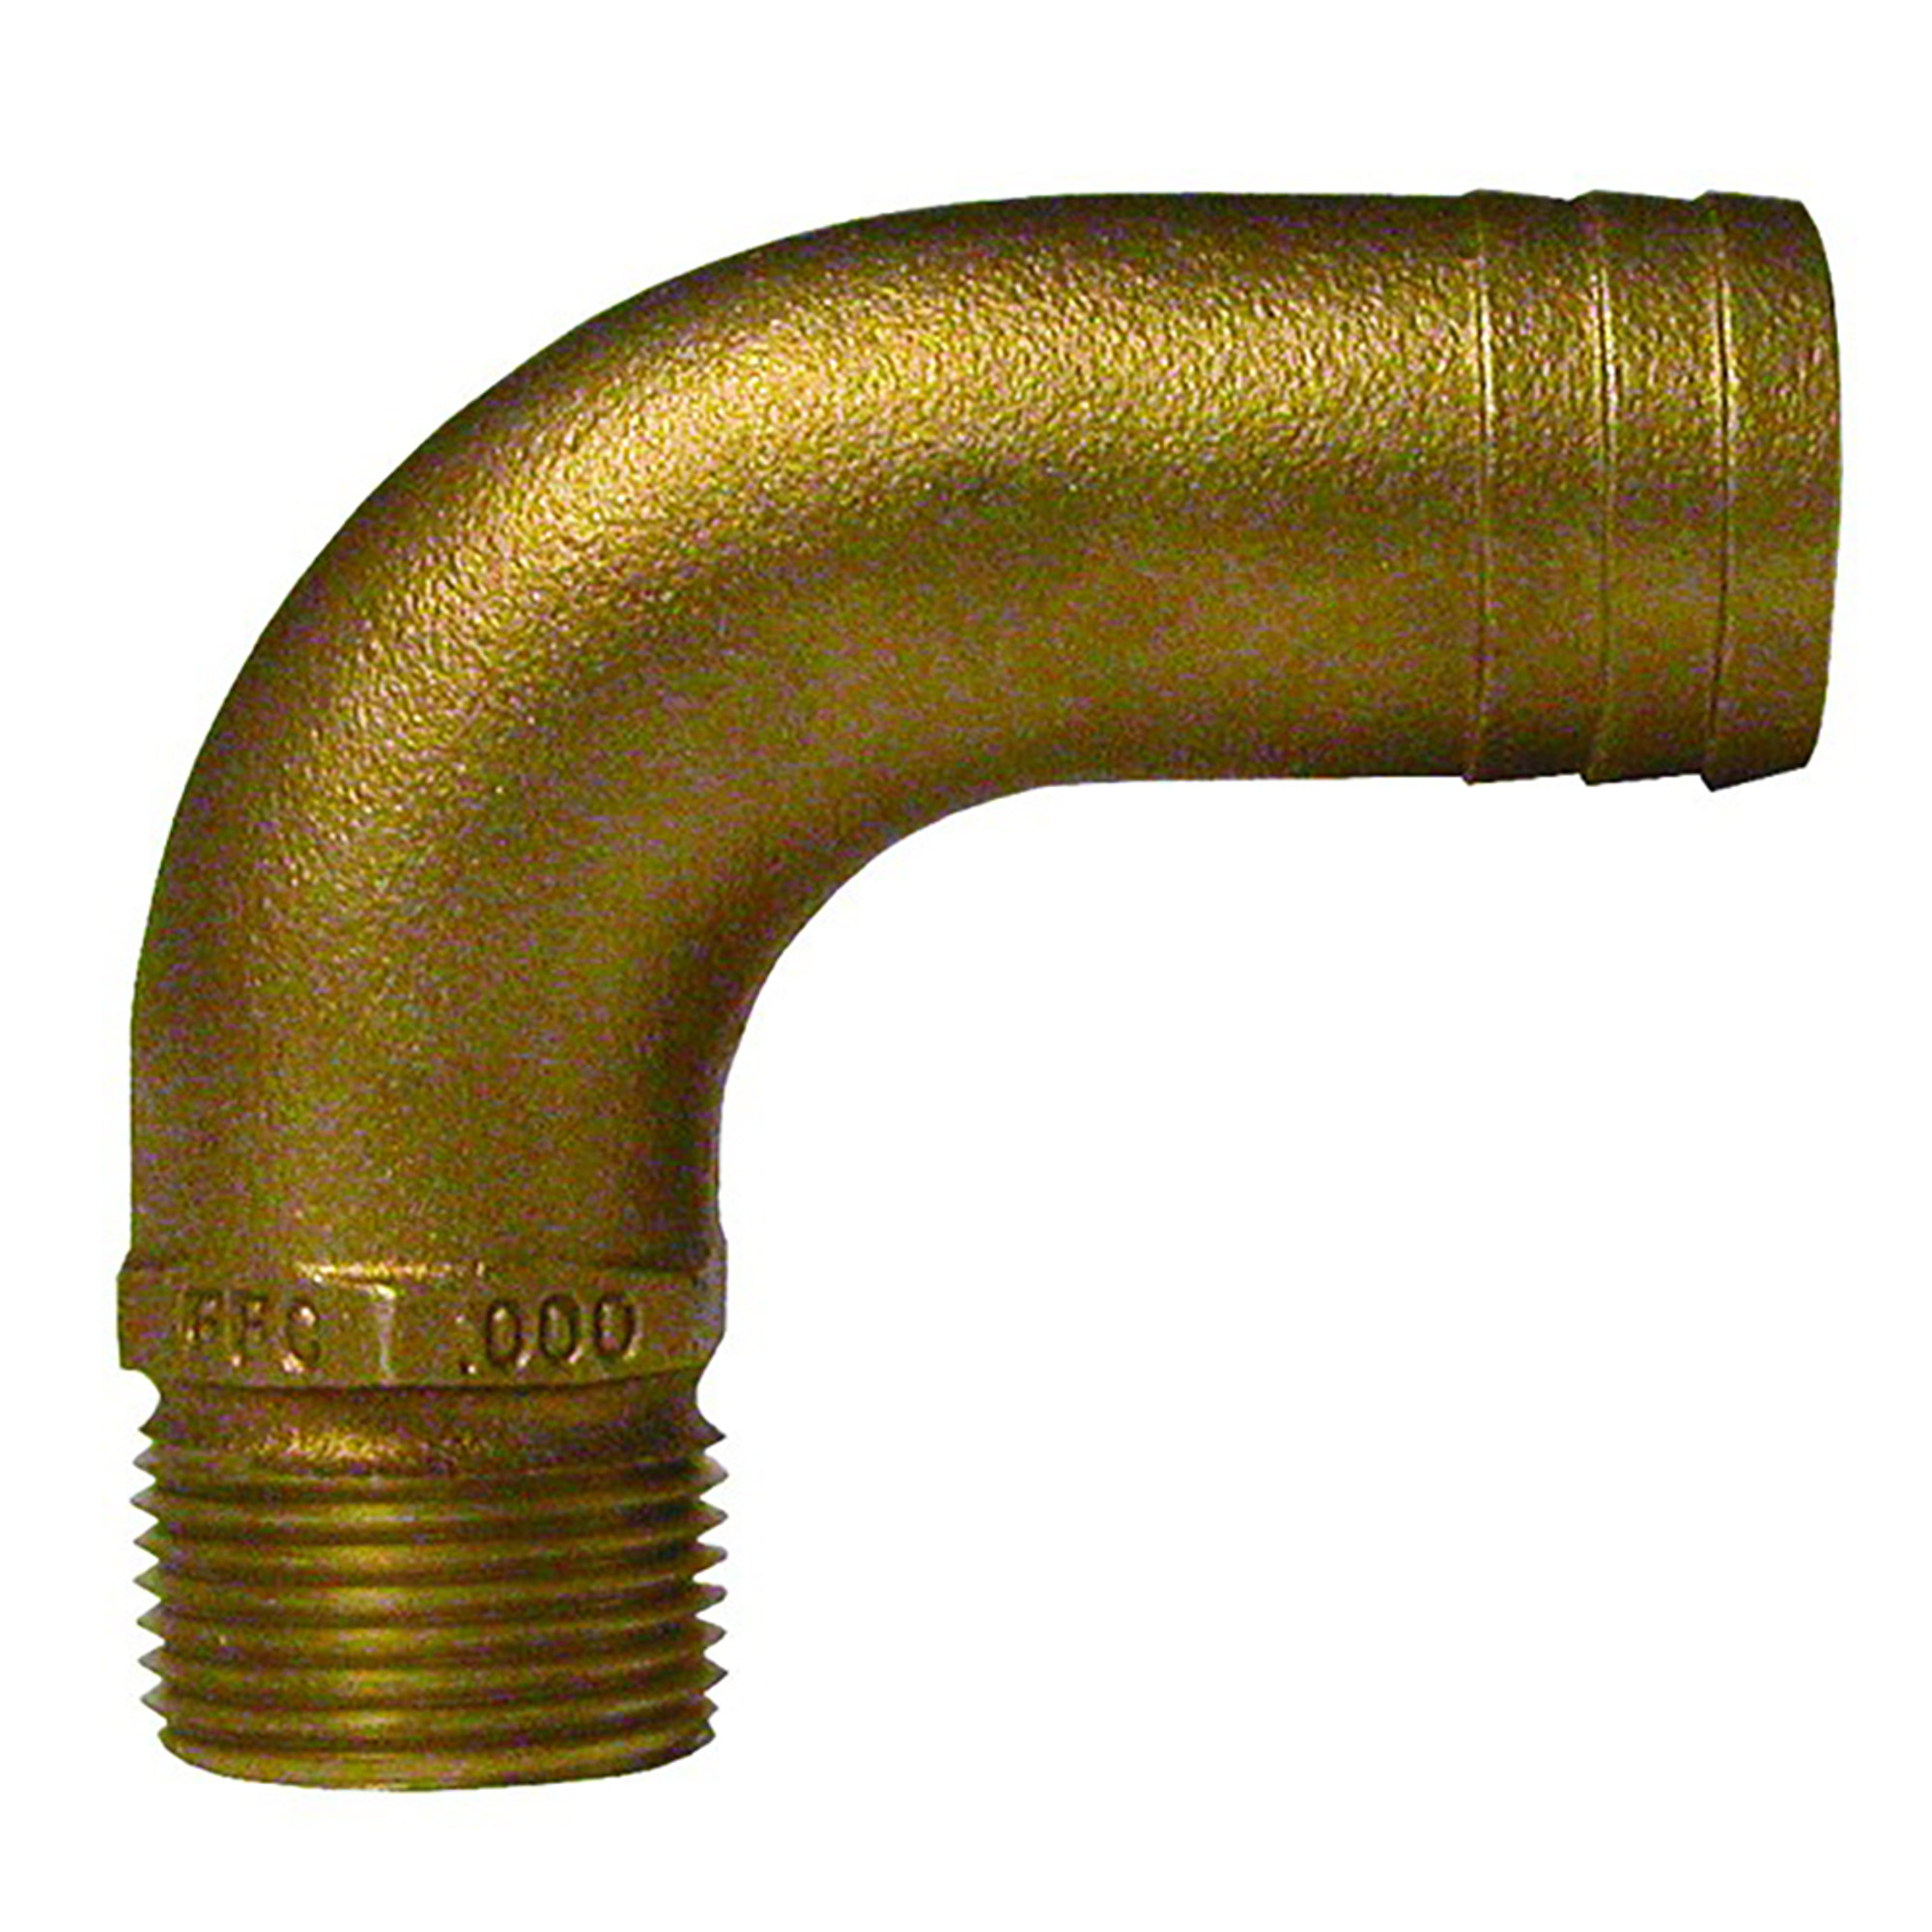 GROCO 1-1/2" NPT x 1-3/4" ID Bronze Full Flow 90 Elbow Pipe to Hose Fitting